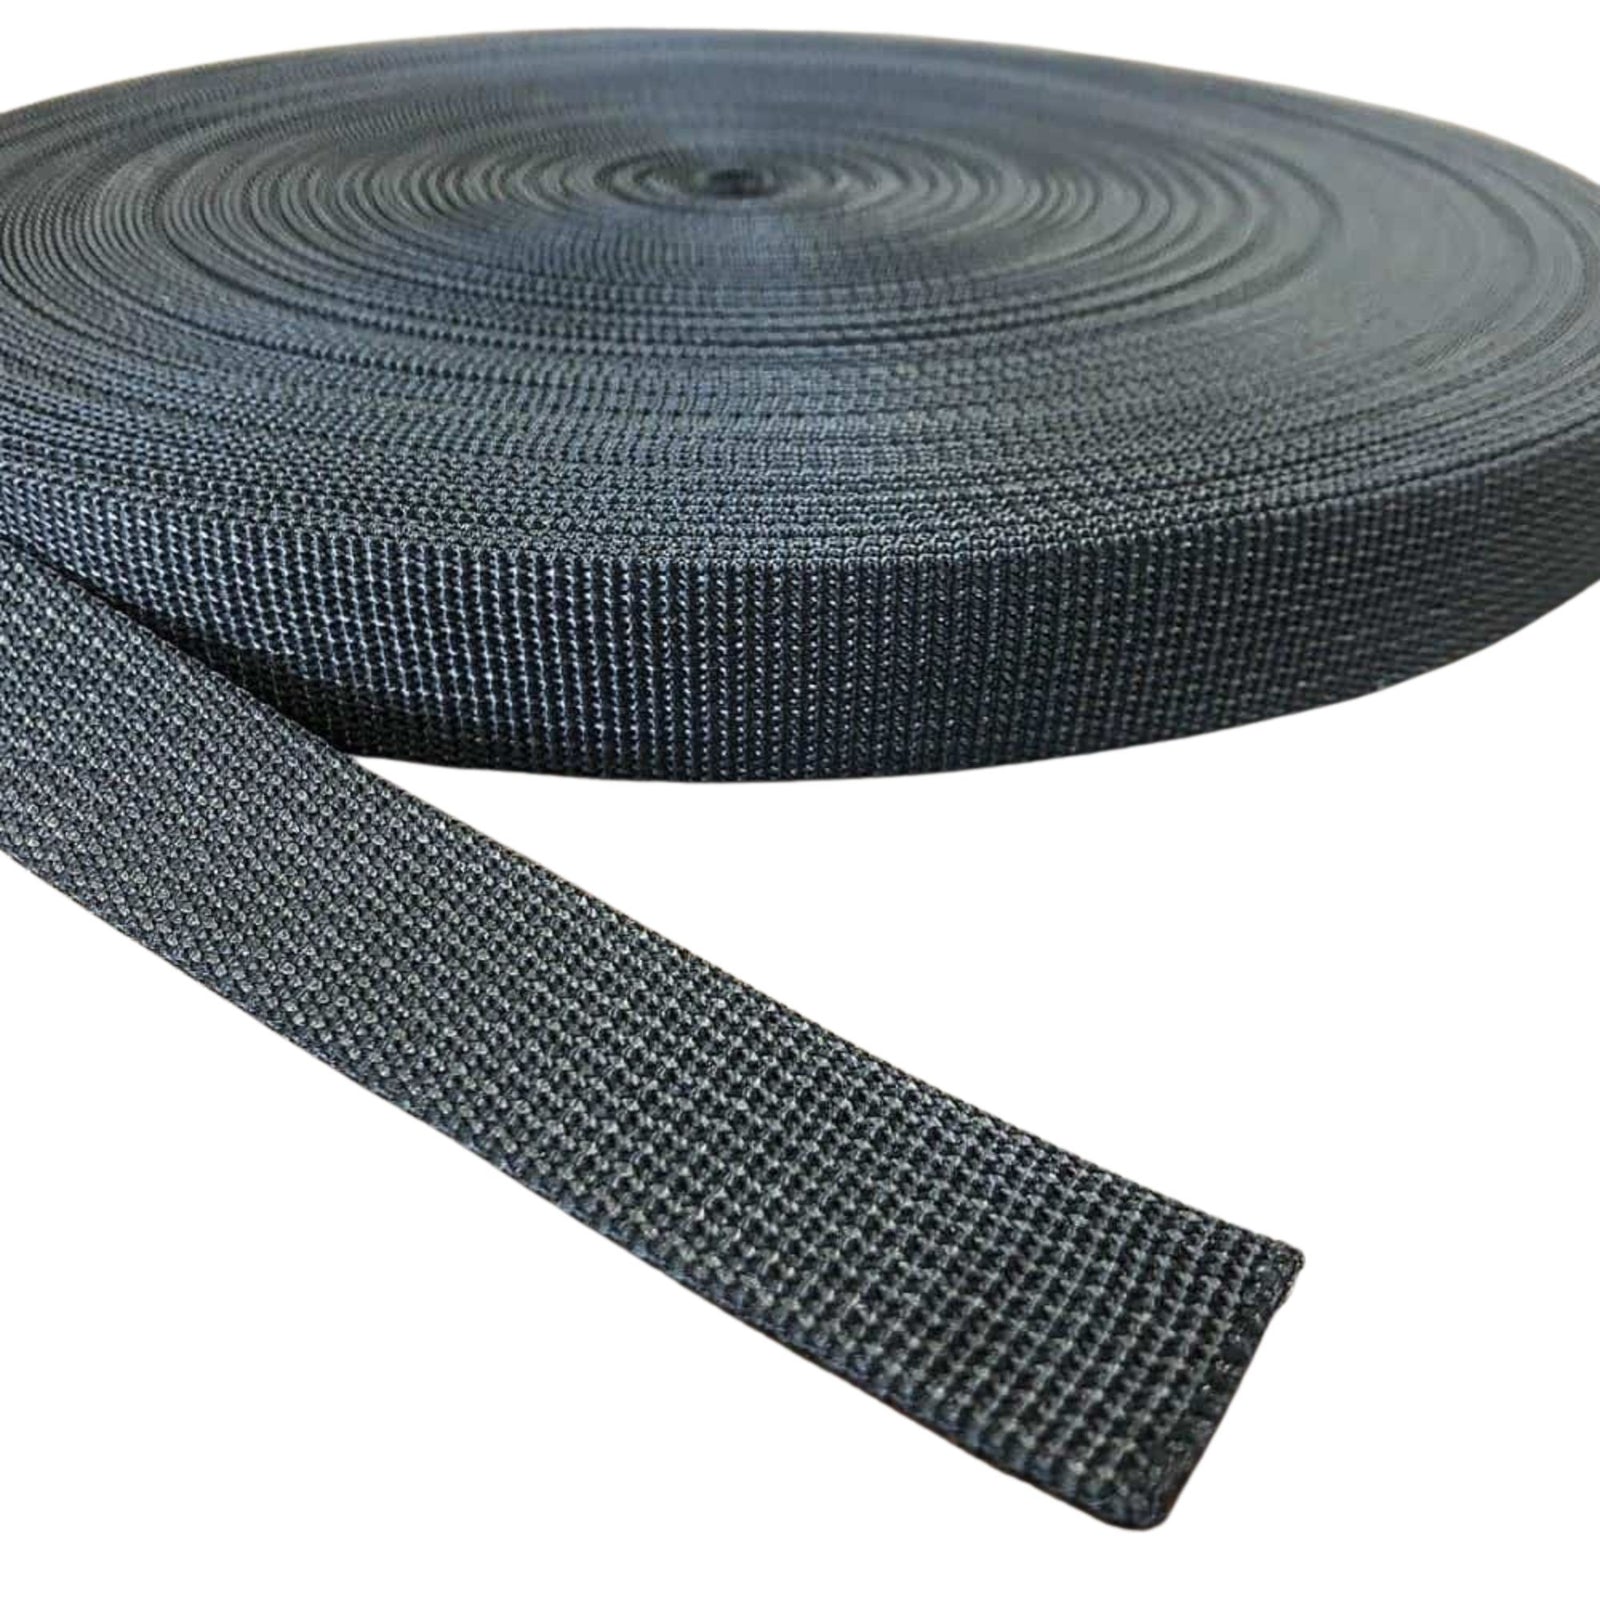 Flat Webbing for Straps, Slings, Pack Loops - Ripstop by the Roll